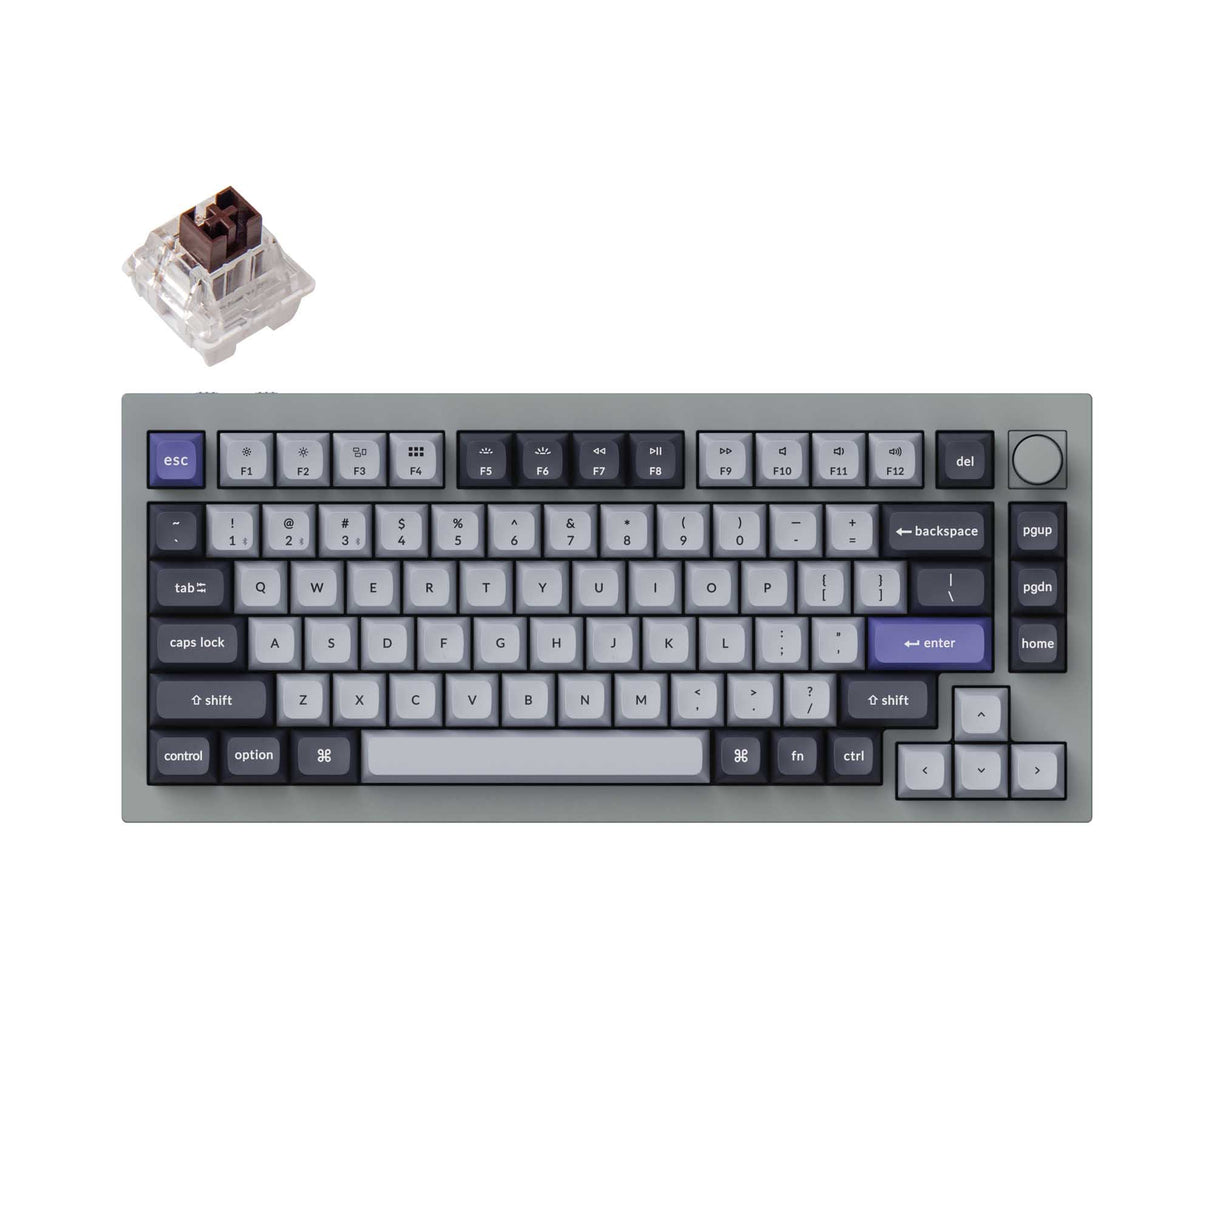 Keychron Q1 Pro QMK/VIA wireless custom mechanical keyboard 75% layout full aluminum grey frame for Mac WIndows Linux with RGB backlight and hot-swappable K Pro switch brown